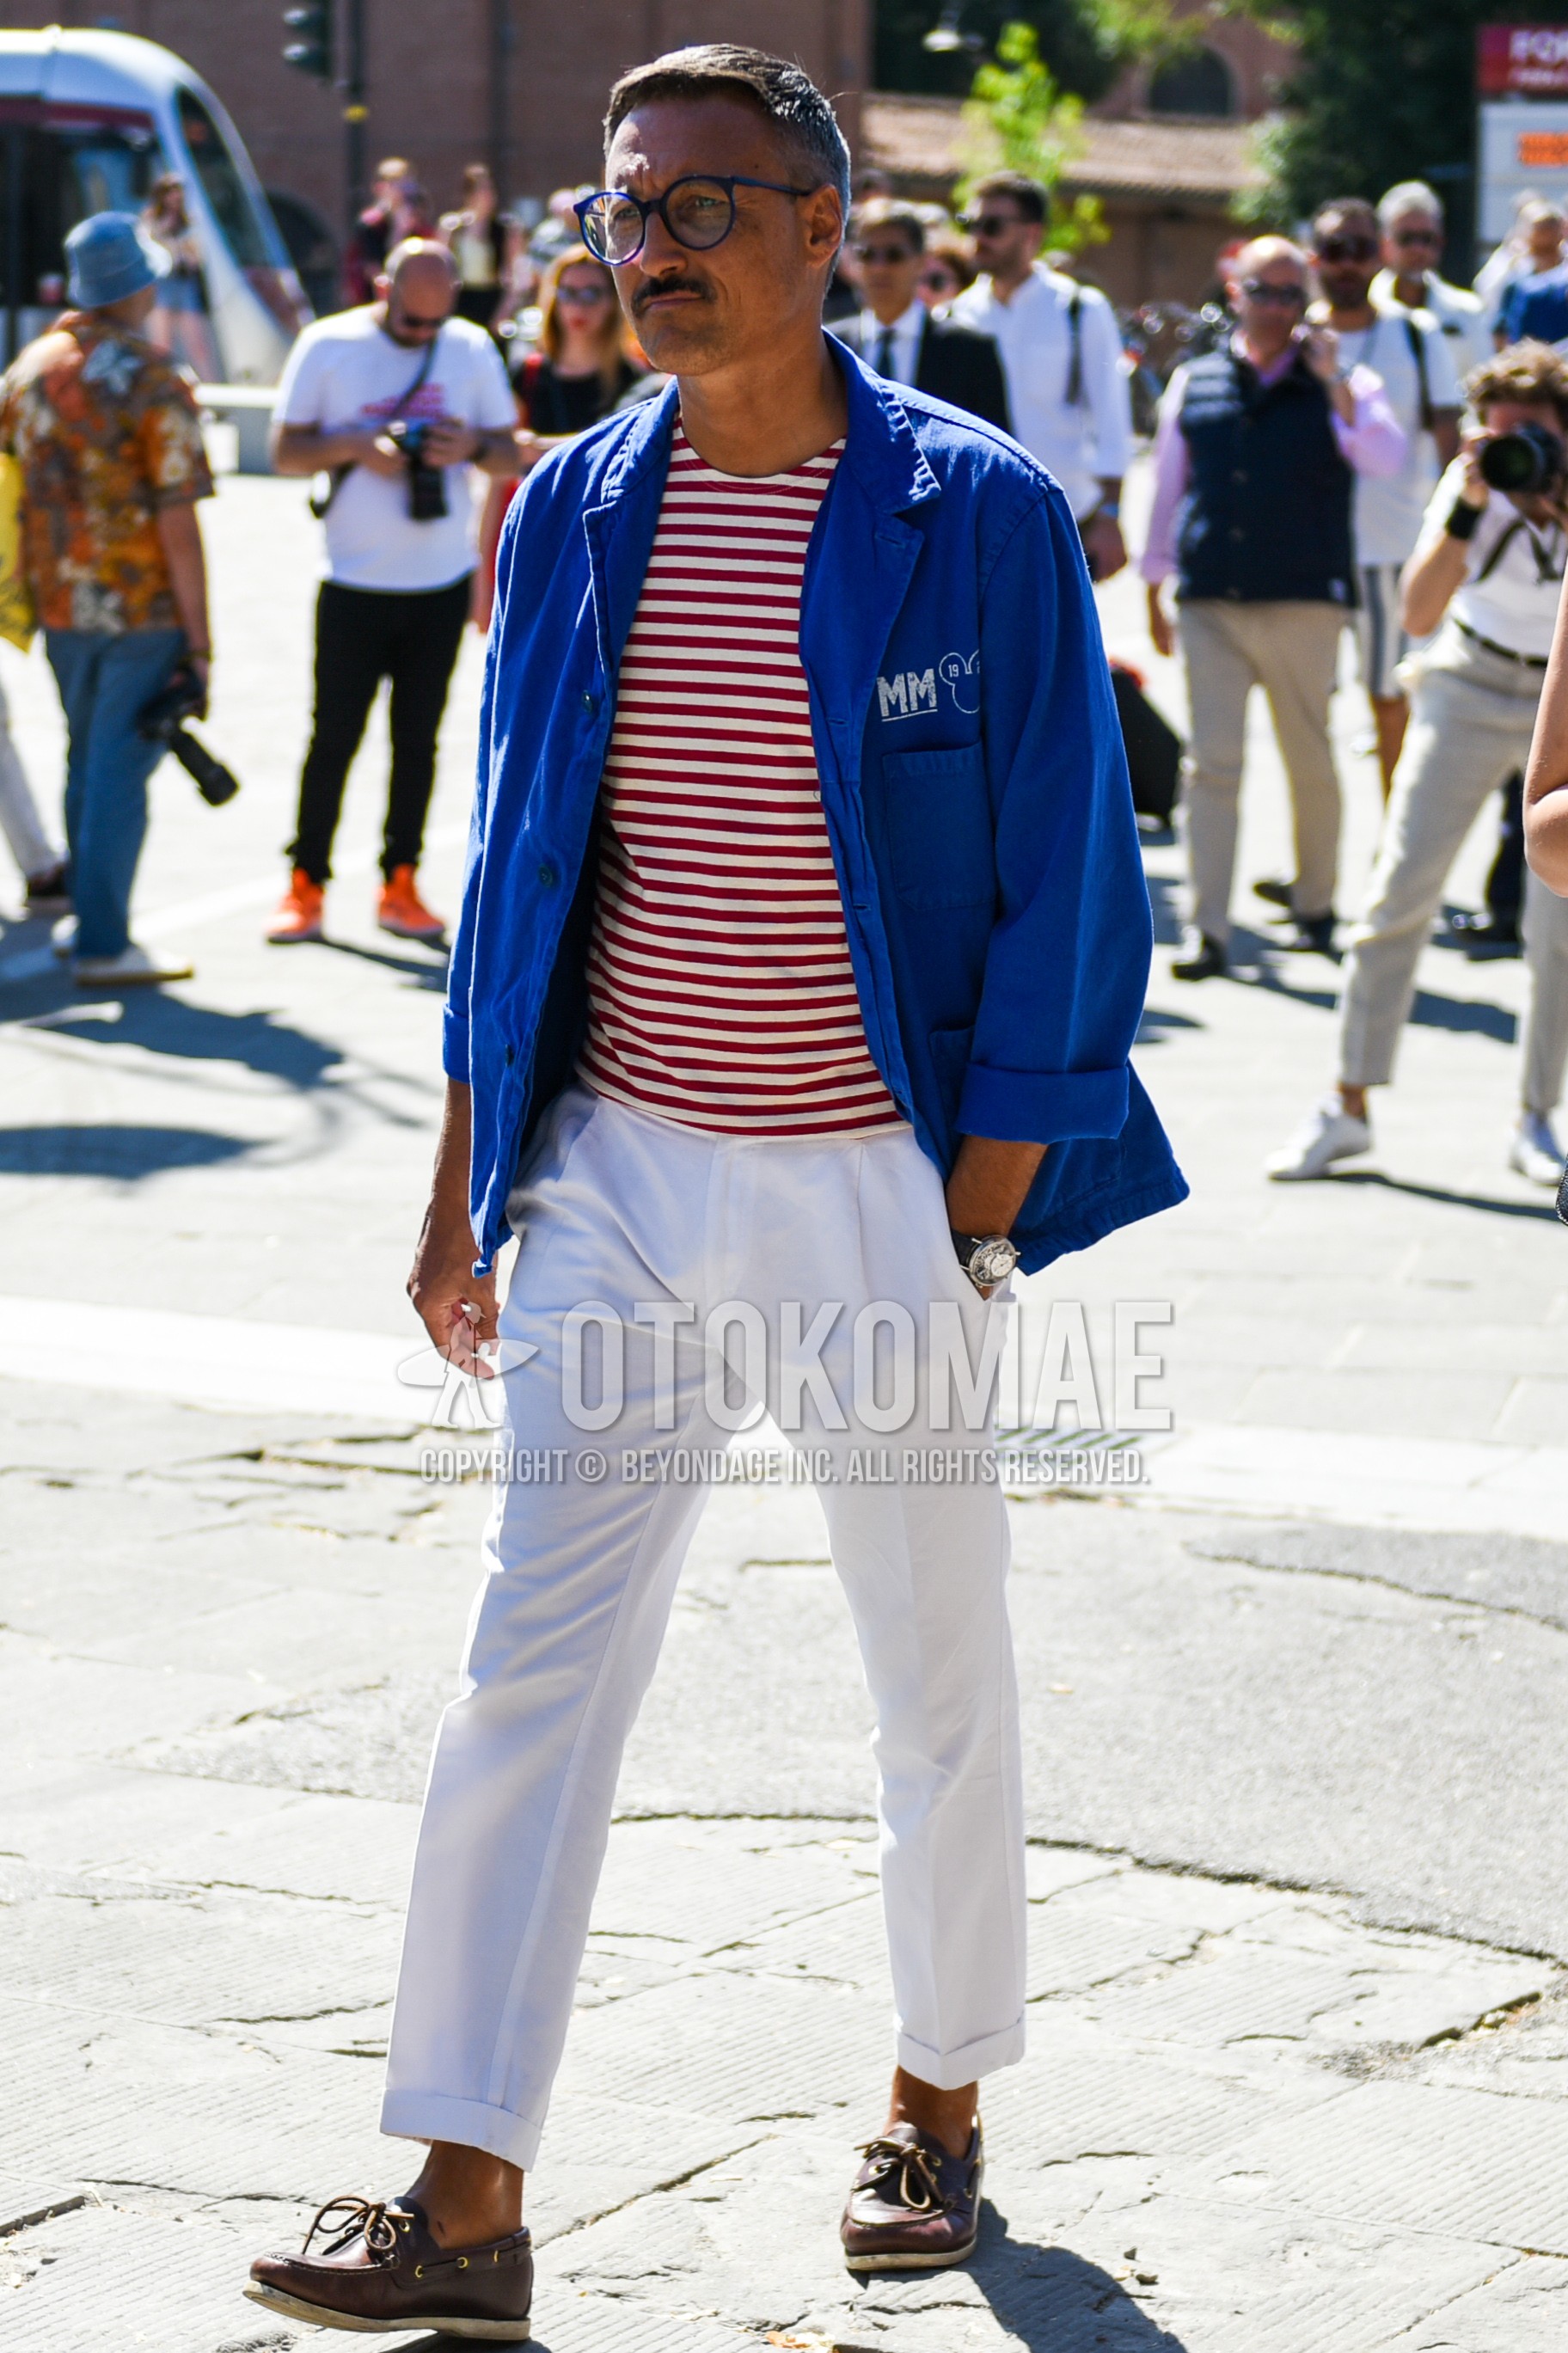 Men's spring autumn outfit with blue one point tailored jacket, white red horizontal stripes t-shirt, white plain slacks, plain pleated pants, brown moccasins/deck shoes leather shoes.